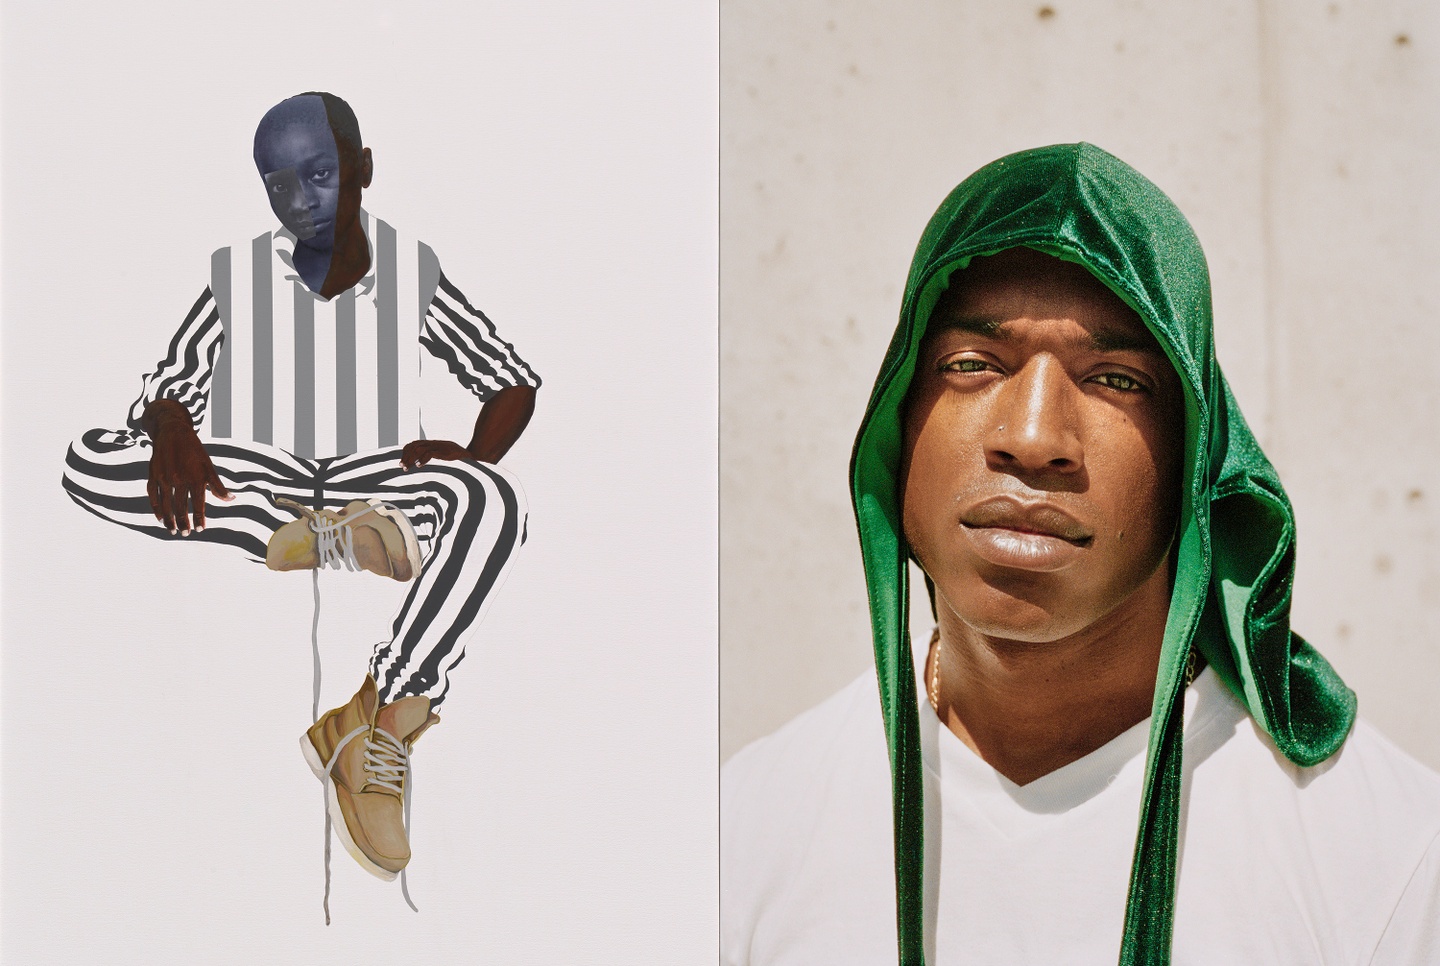 Left: a boy sits in prison stripes; right: a man wears a shiny green durag